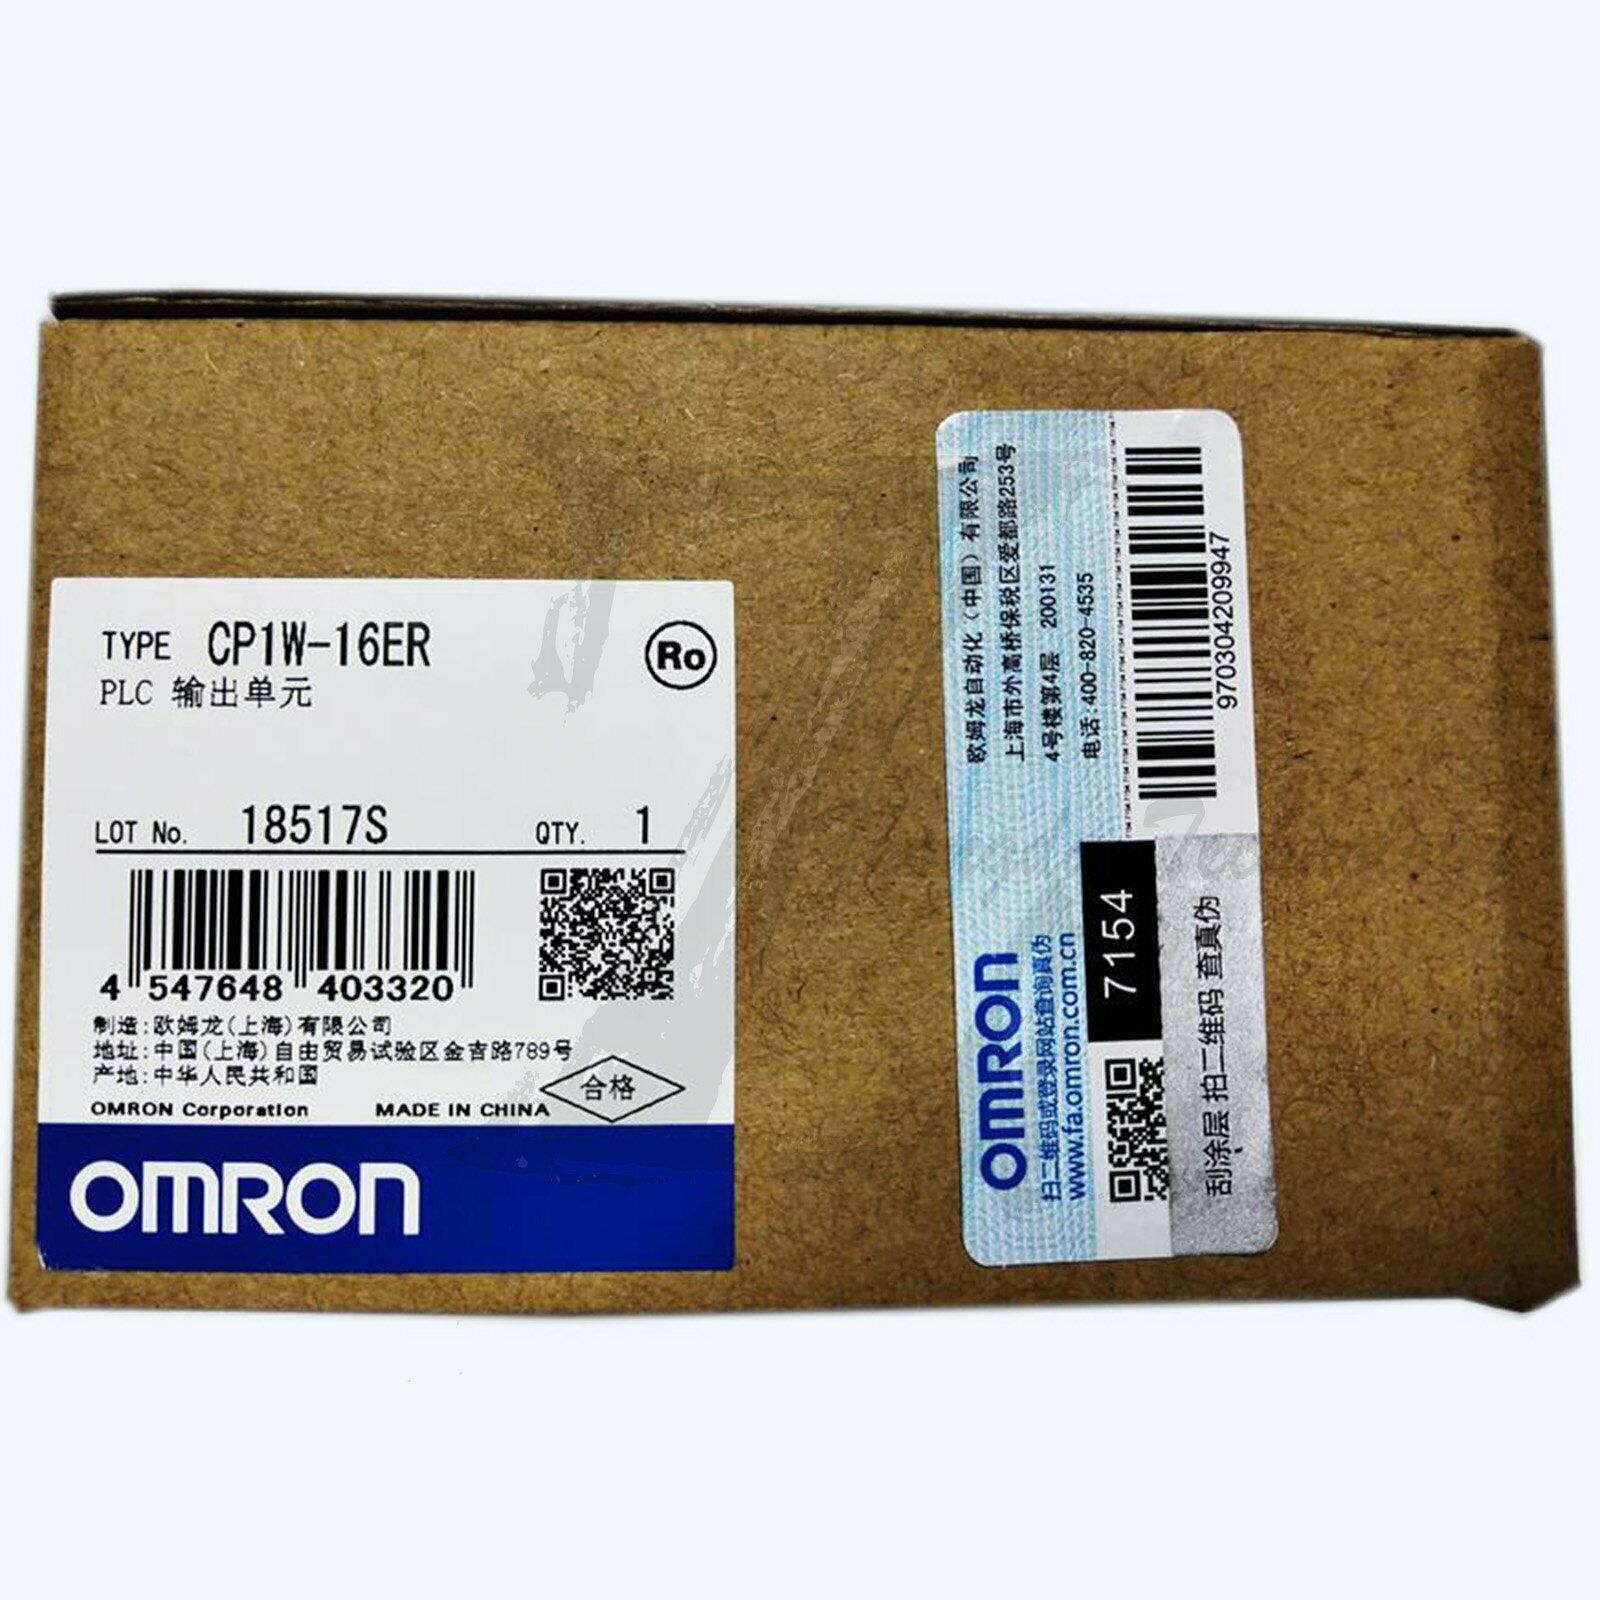 1pc new Omron output module CP1W-16ER one year warranty KOEED 201-500, 80%, import_2020_10_10_031751, Omron, Other